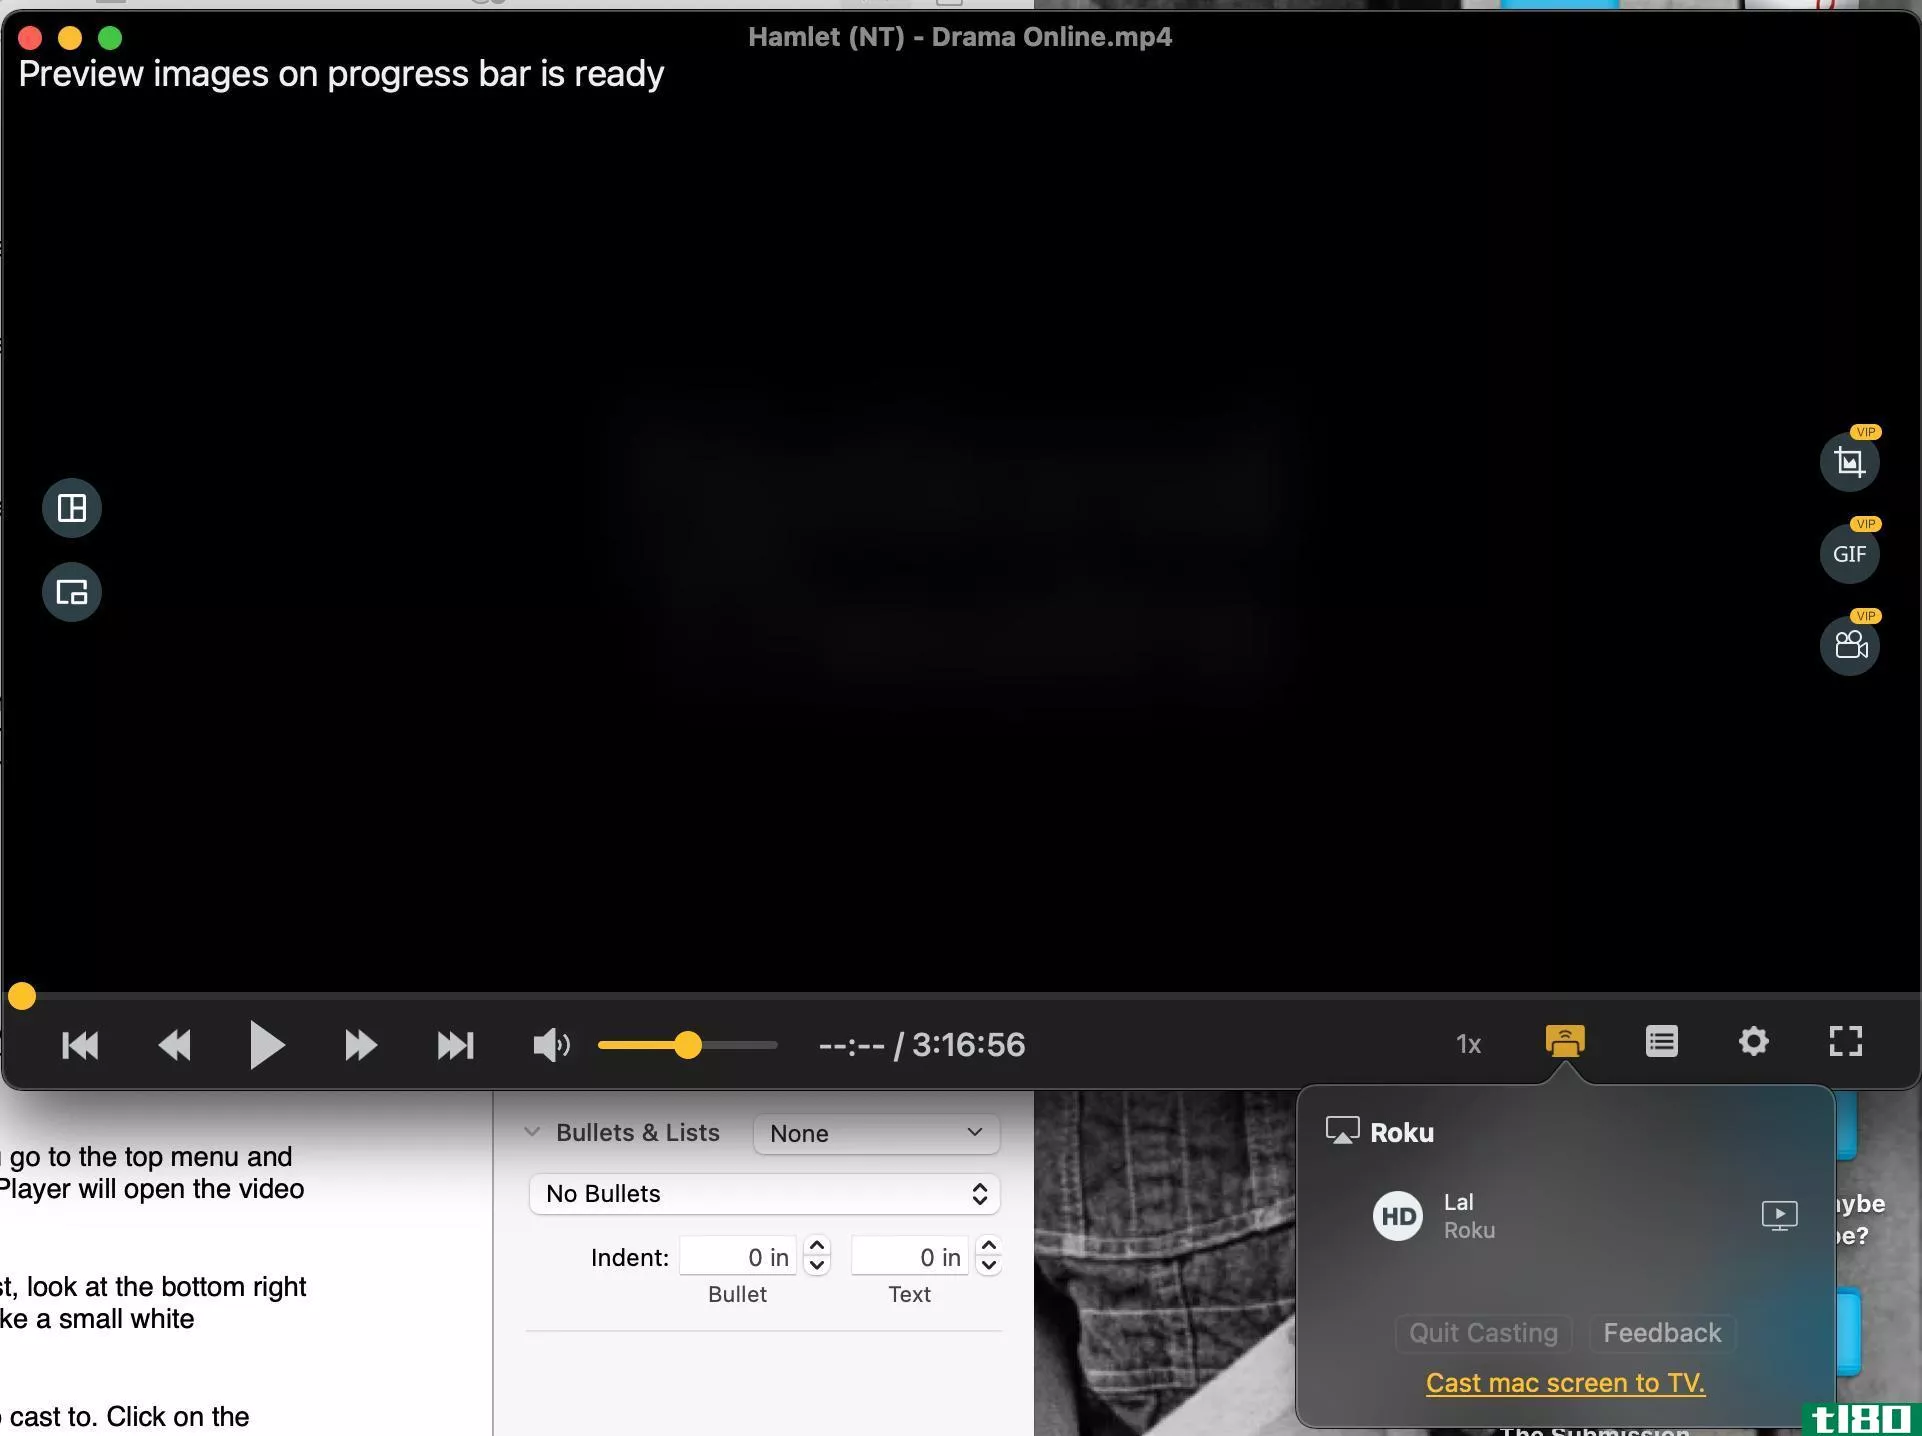 A view of an open video file in the Omni Player app. The casting icon is selected, and a Roku name is visible